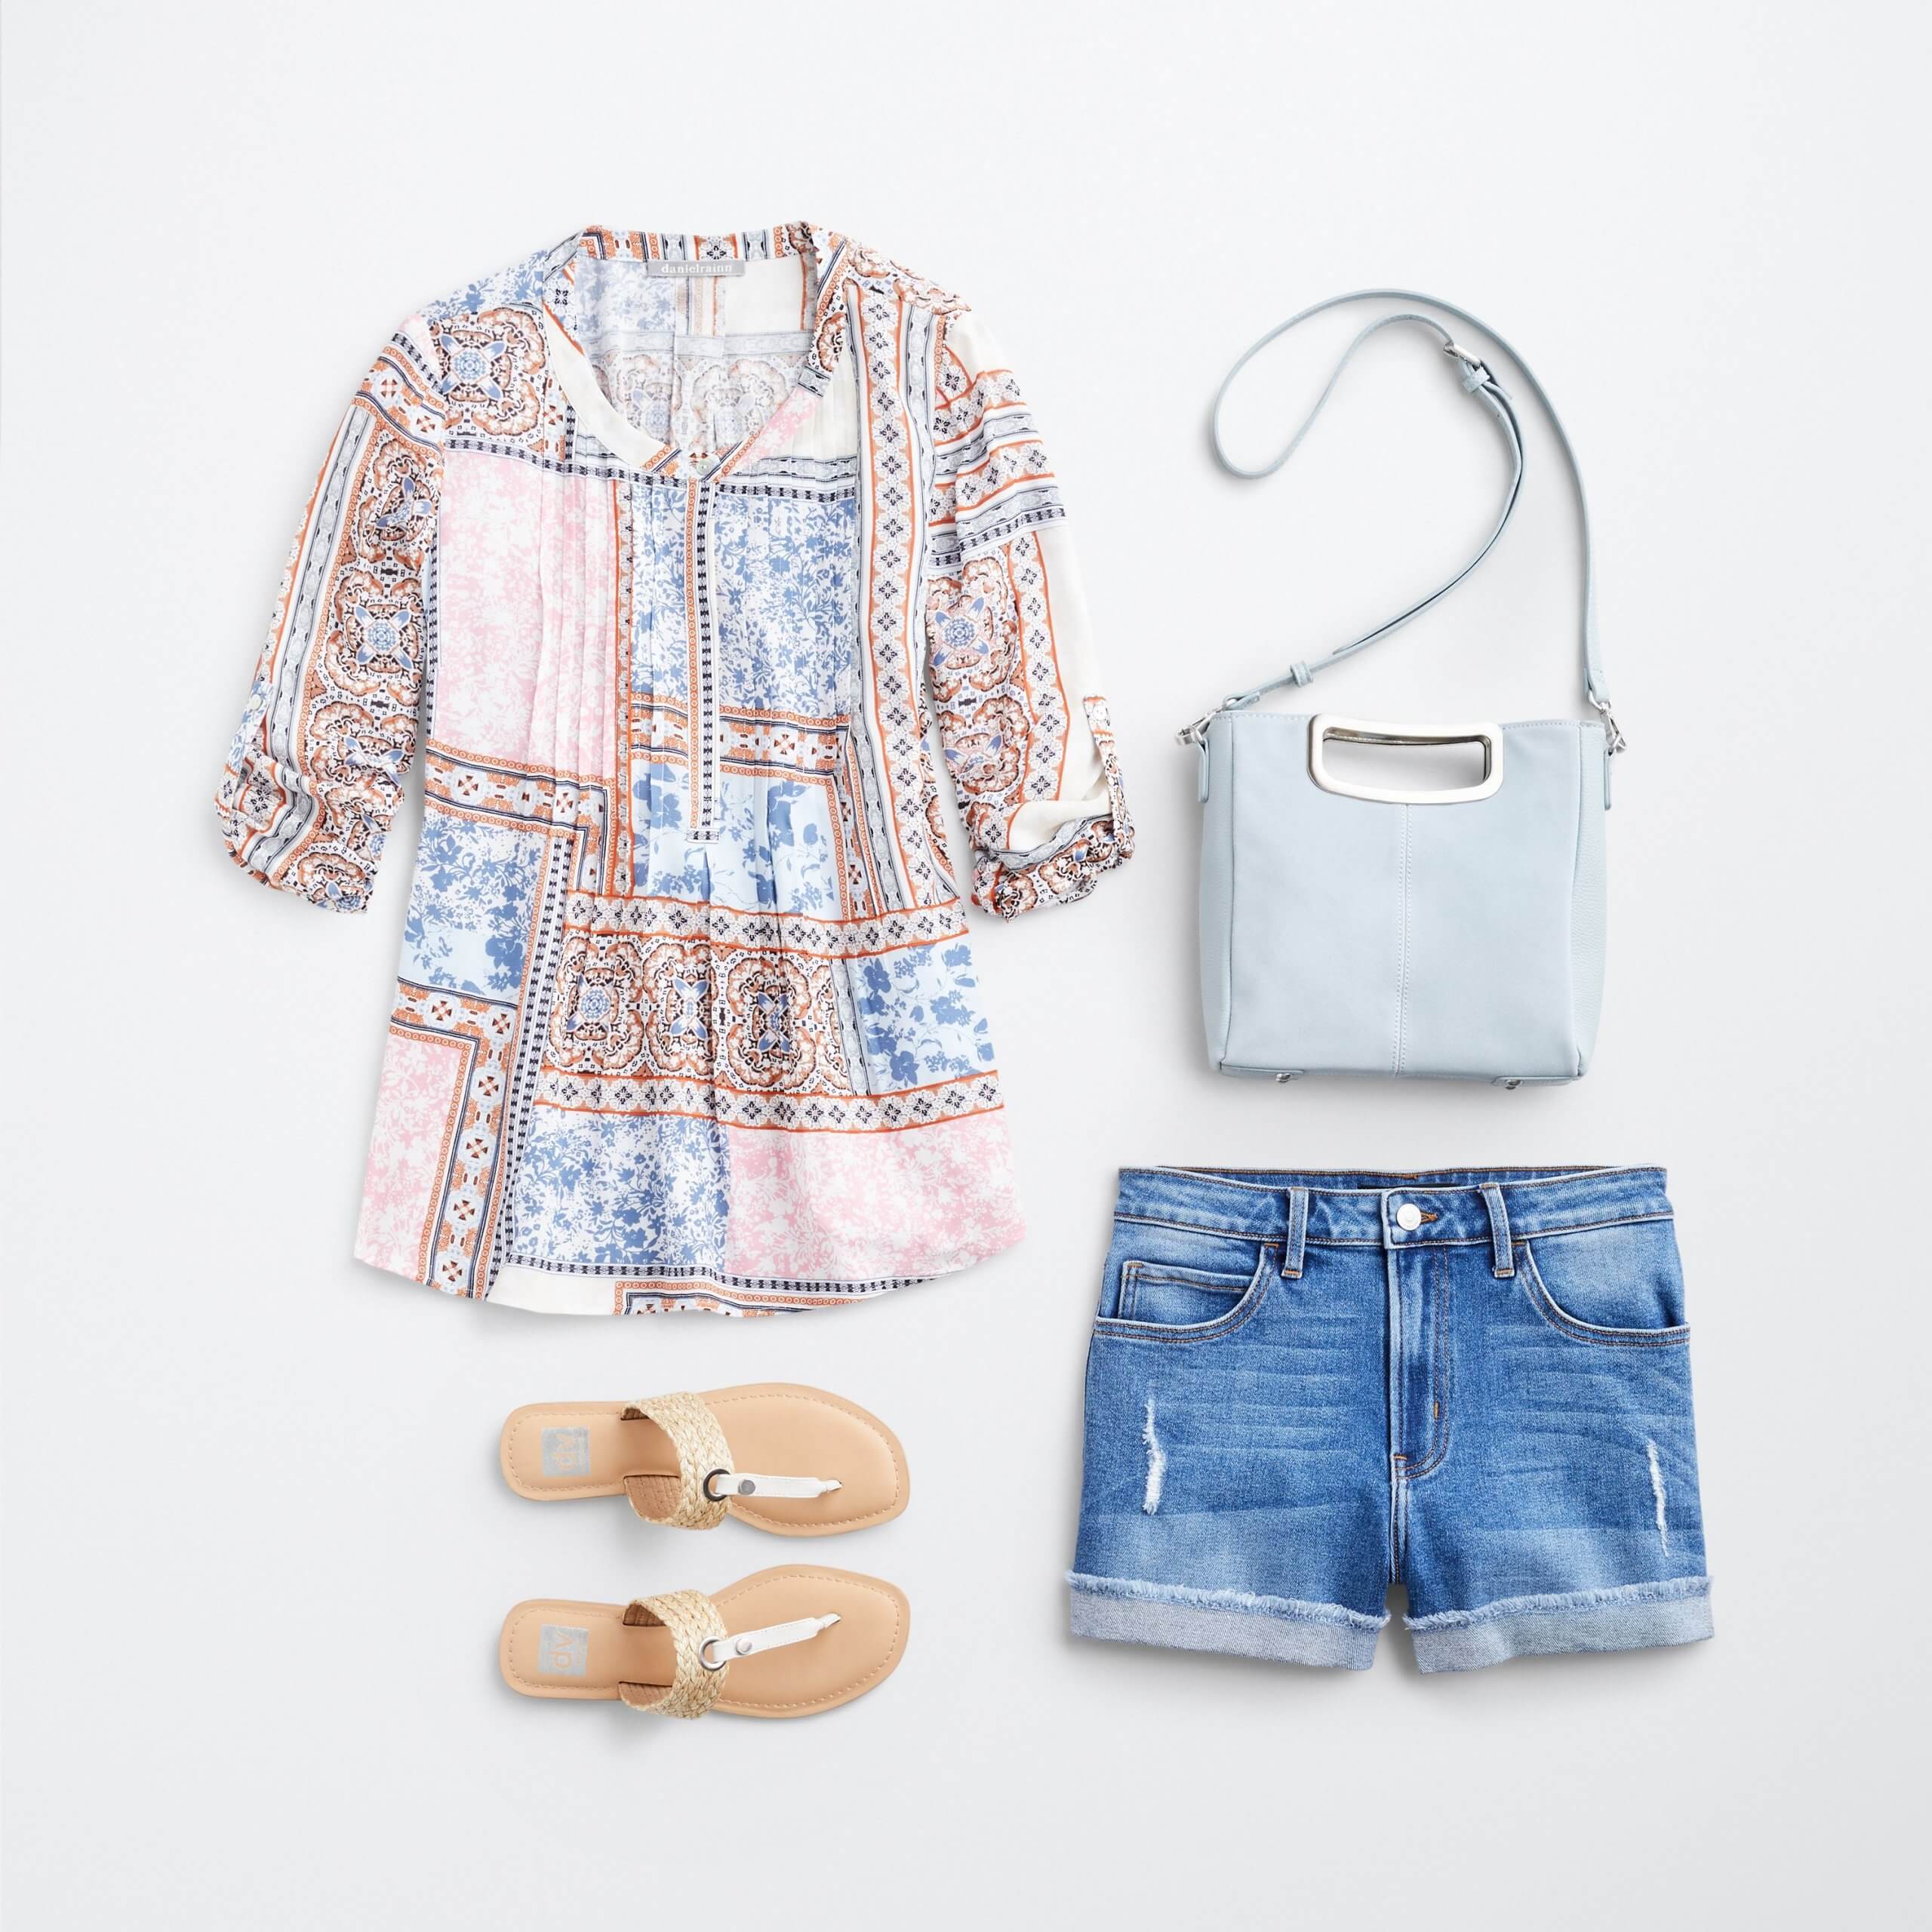 Stitch Fix Women's outfit laydown featuring pink, blue and burnt orange boho print top, white sandals, denim shorts and baby blue crossbody bag. 